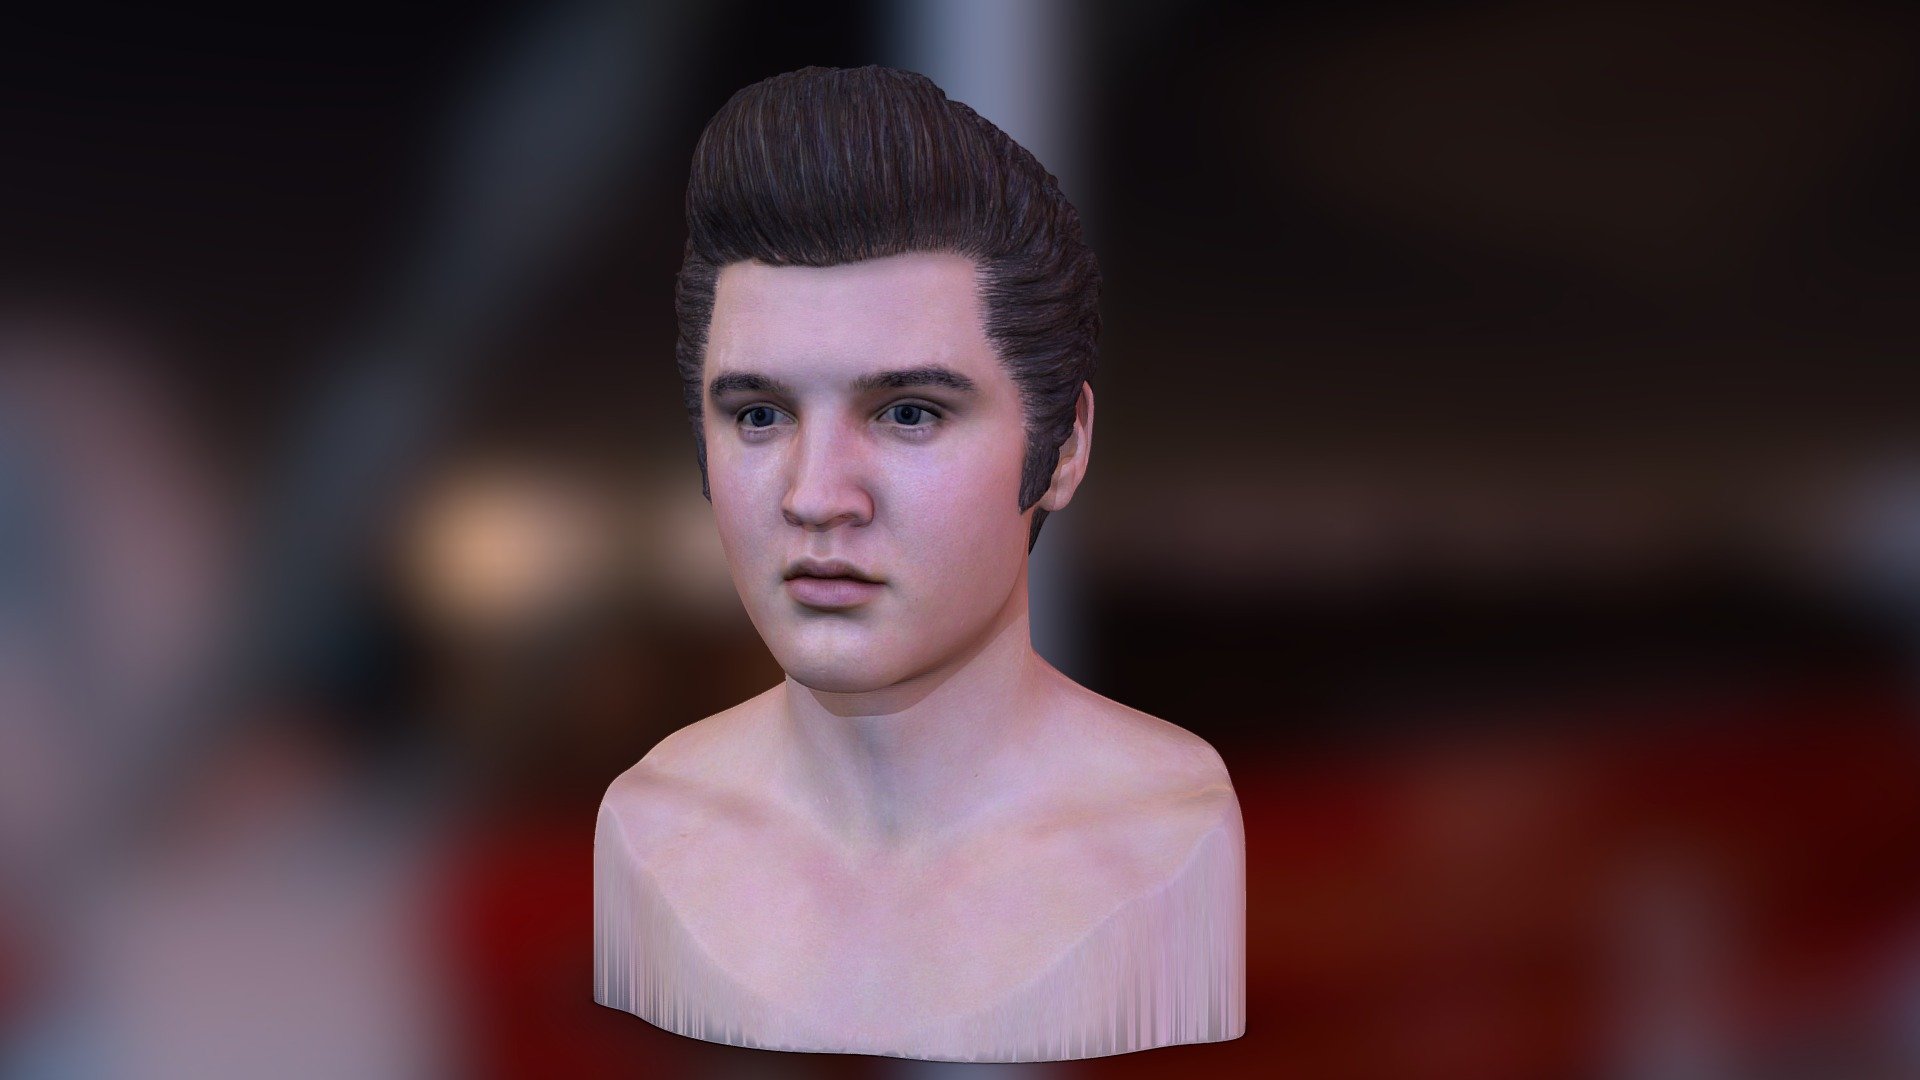 The 3d character available here:
https://steplont.blogspot.com/2020/10/3d-printable-model-elvis-presley-head.html

3d printable model Elvis Presley head

The 3d printable model Elvis Presley head

The model has verts:

file hair_head_1000.obj &ndash; verts: 1000000 texture: 8192 x 8192
file hair_head_500.obj &ndash; verts: 500000 texture: 8192 x 8192
file hair_head_250.obj &ndash; verts: 250000 texture: 8192 x 8192

file hair_head_1000.obj &ndash; verts: 1000000 texture: 8192 x 8192
file hair_head_500.obj &ndash; verts: 500000 texture: 8192 x 8192
file hair_head_250.obj &ndash; verts: 250000 texture: 8192 x 8192

The head has no symmetry topology.
Final images are rendered in Blender v2.79b Cycles Render - 3d printable model Elvis Presley head - 3D model by steplont 3d model